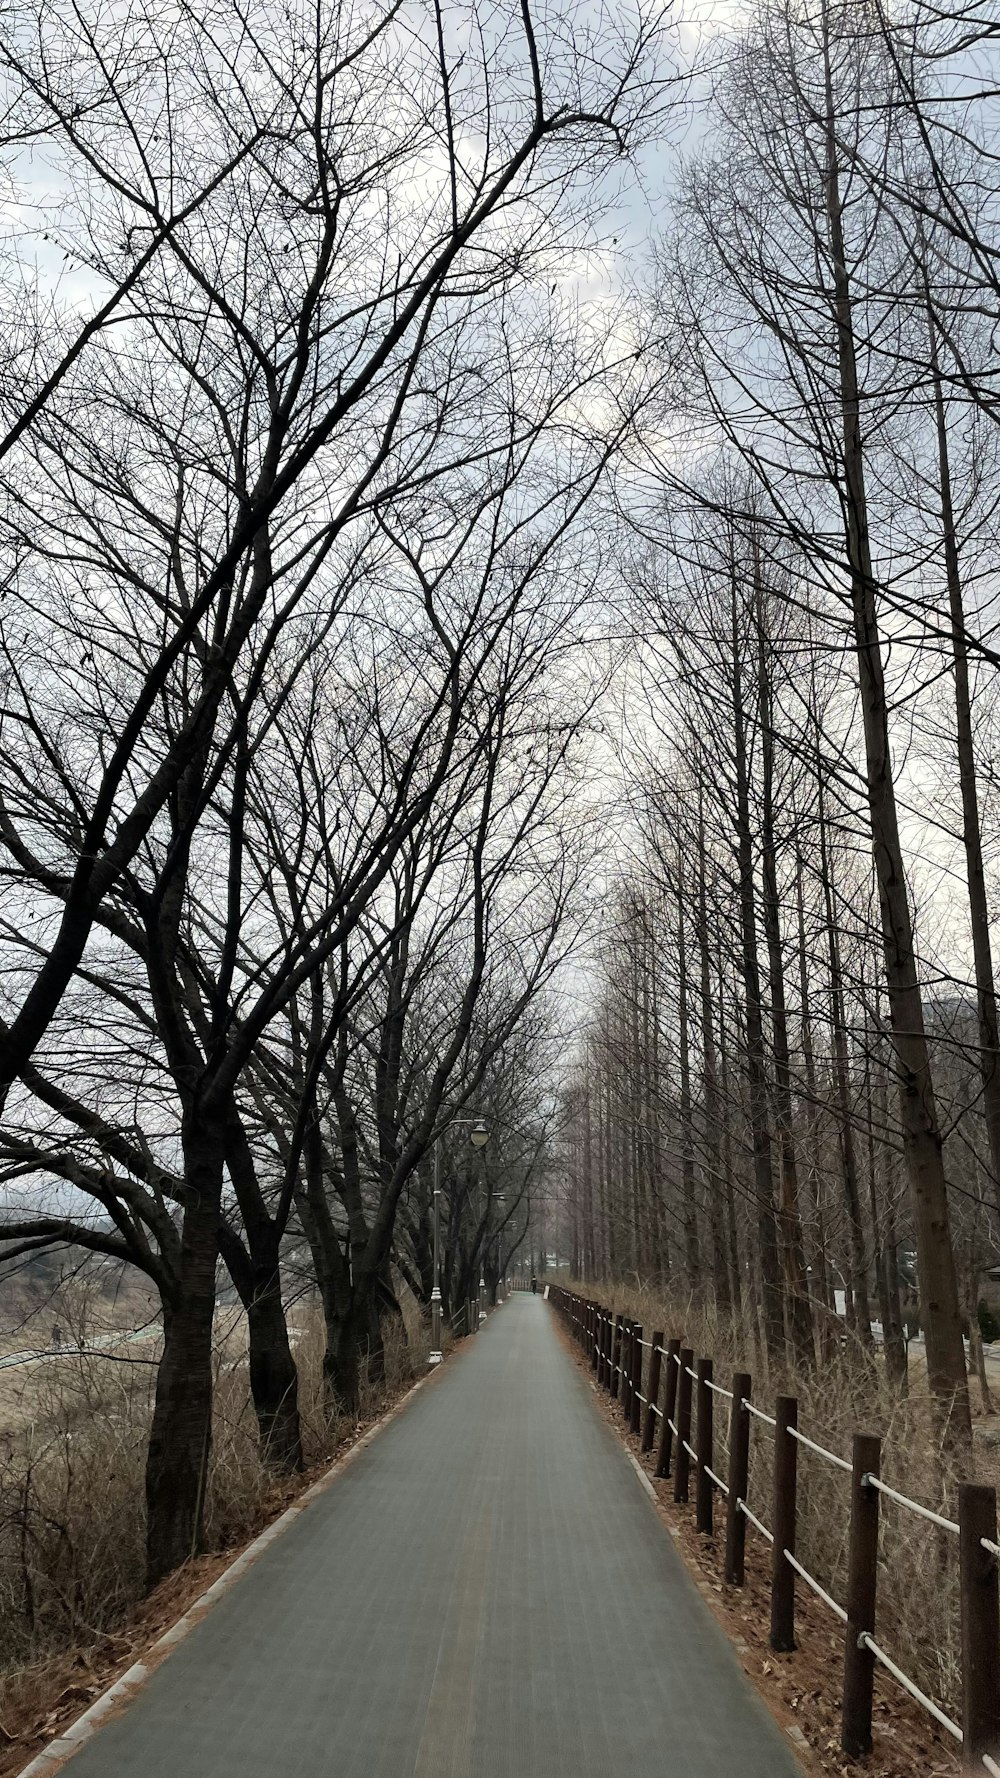 a paved road surrounded by bare trees on a cloudy day